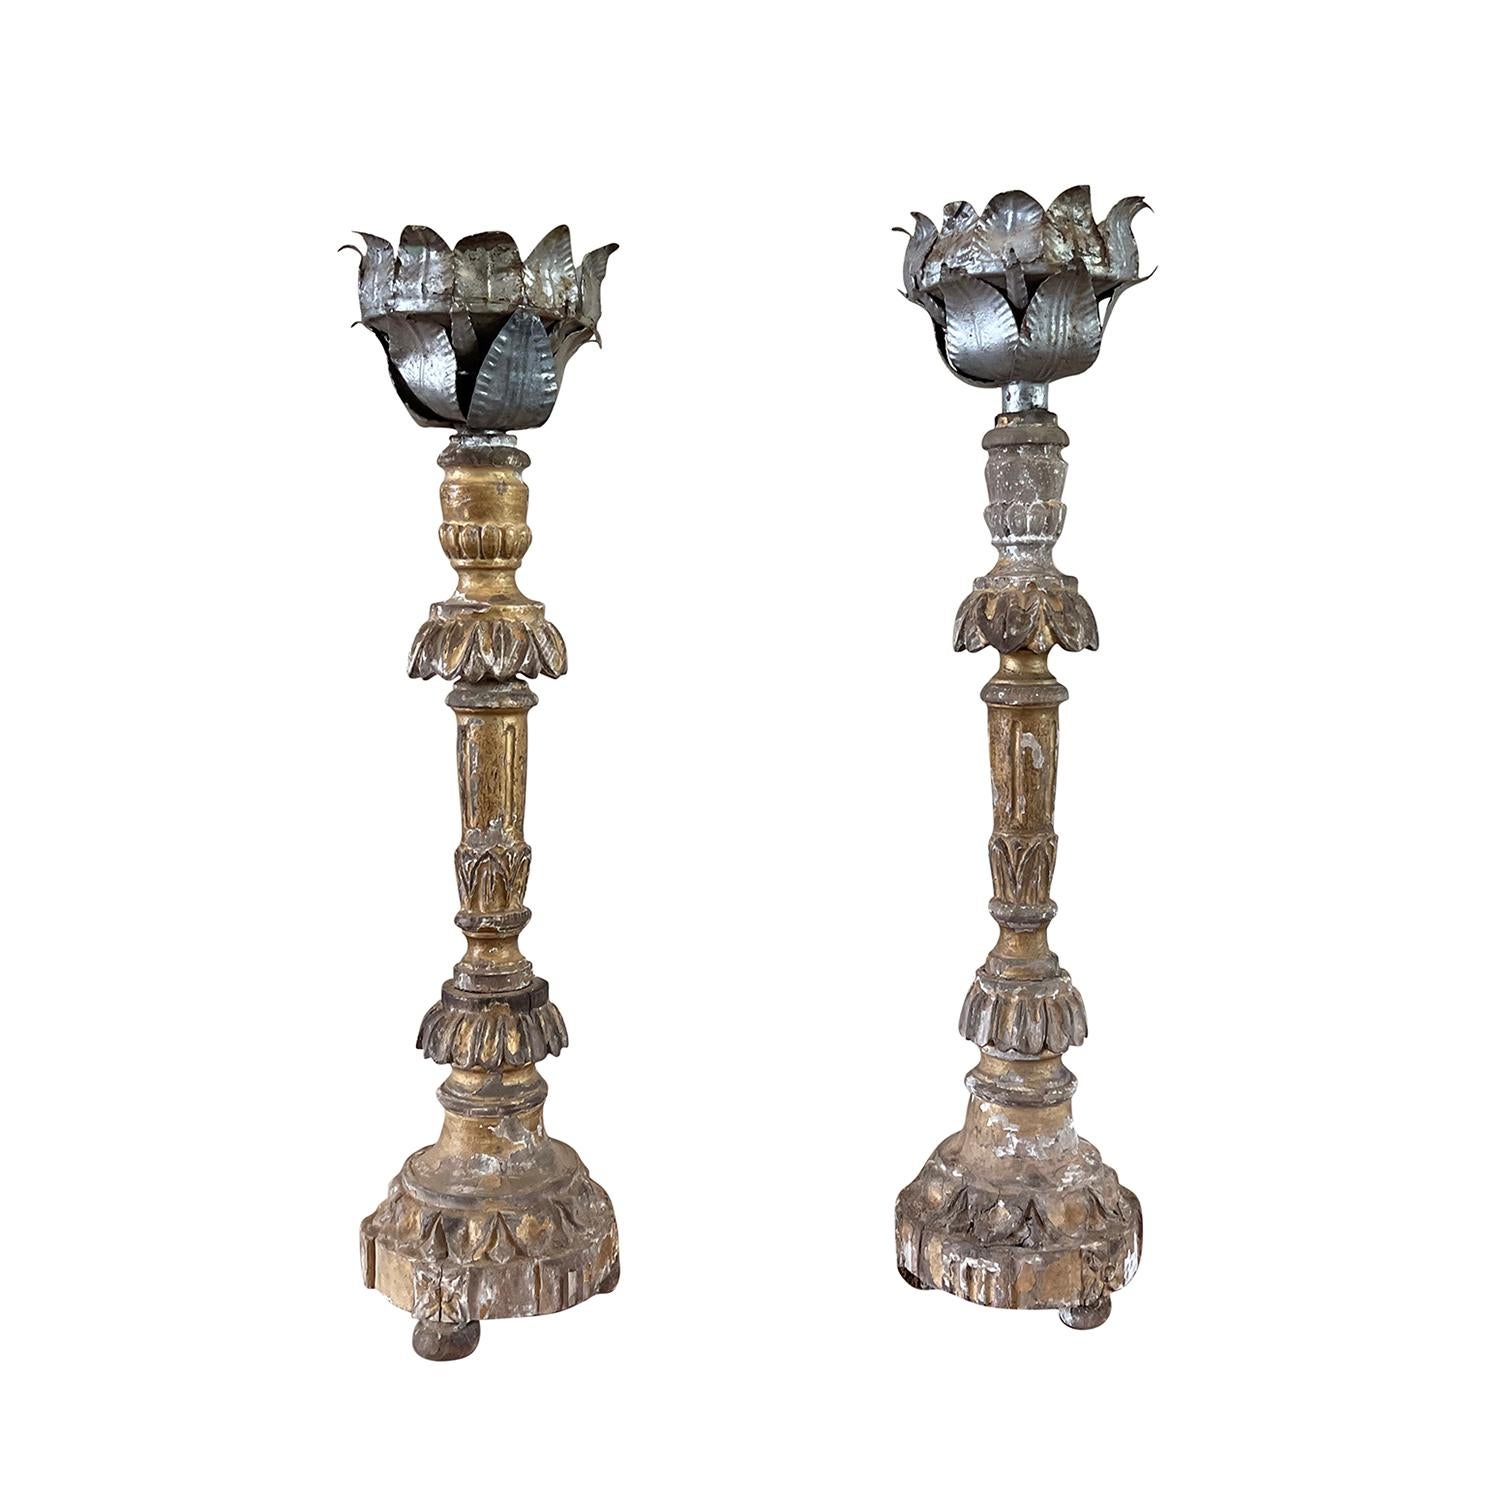 An antique French pair of early 19th Century candle holders on tripod base, carved out of Pinewood with acanthus leaf décor. Original polychrome silver gold patina, in good condition. Topped with hand crafted abundantly adorned metal cup with